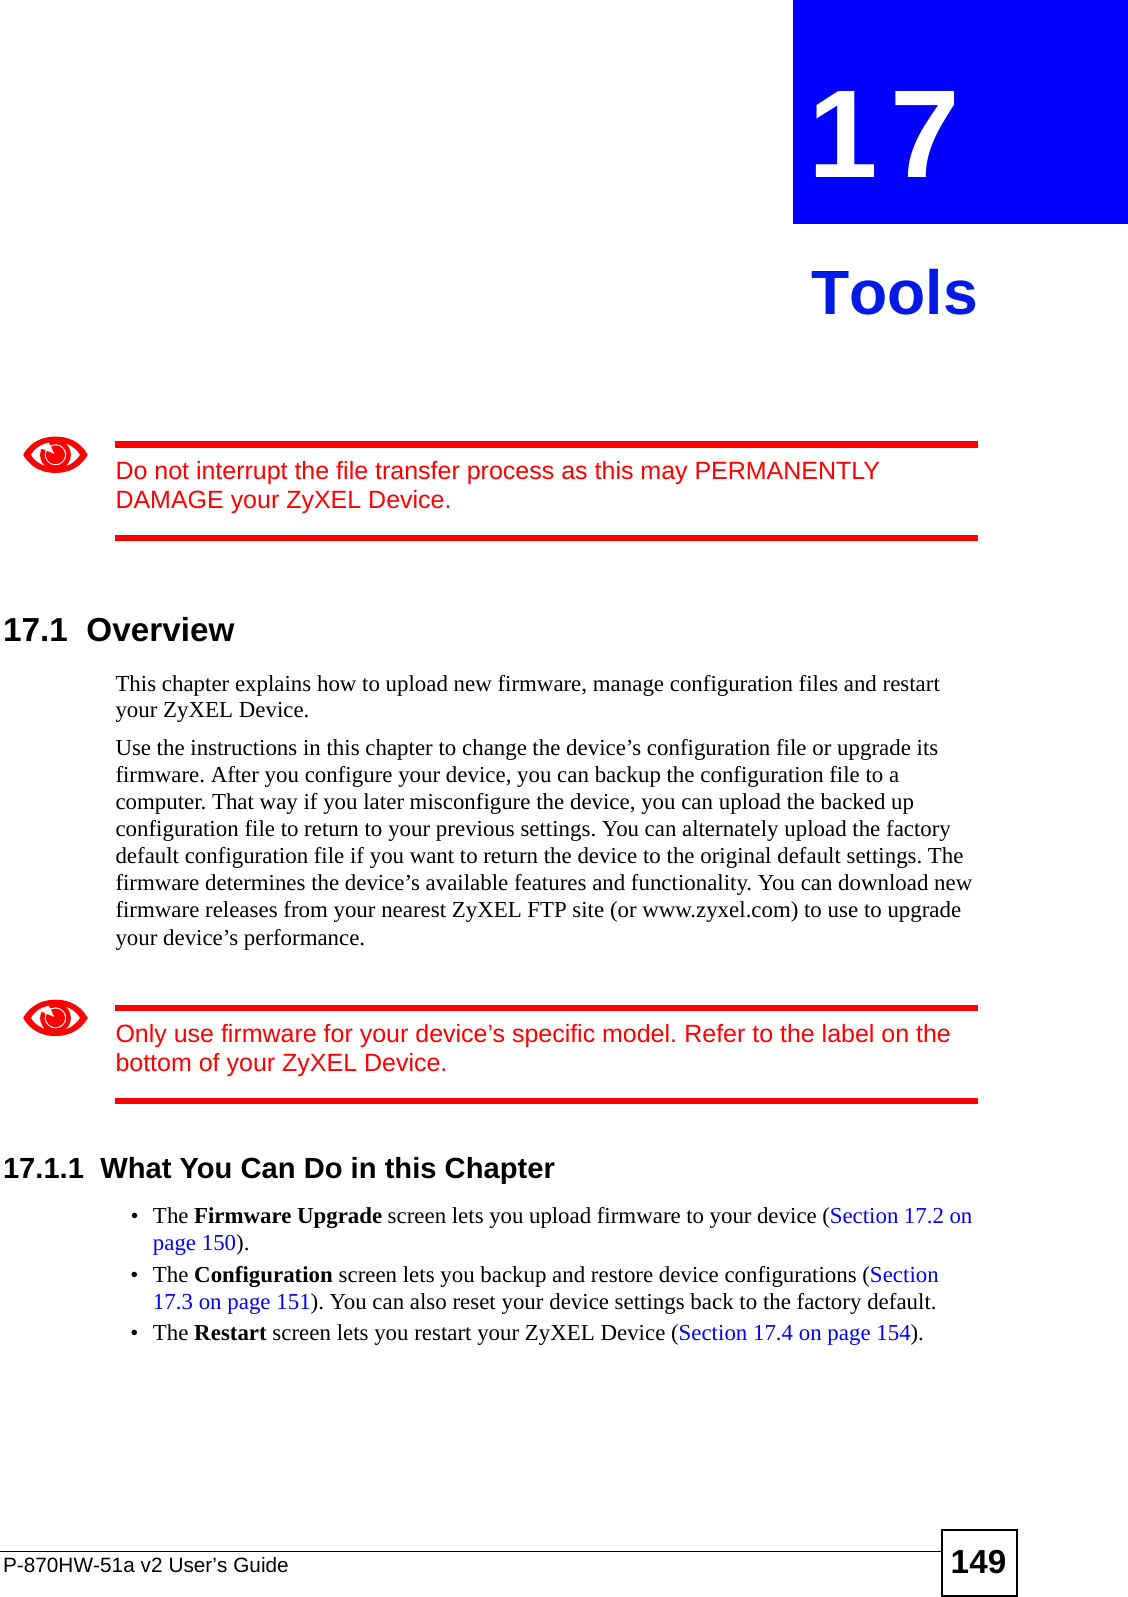 P-870HW-51a v2 User’s Guide 149CHAPTER  17 Tools1Do not interrupt the file transfer process as this may PERMANENTLY DAMAGE your ZyXEL Device. 17.1  OverviewThis chapter explains how to upload new firmware, manage configuration files and restart your ZyXEL Device.Use the instructions in this chapter to change the device’s configuration file or upgrade its firmware. After you configure your device, you can backup the configuration file to a computer. That way if you later misconfigure the device, you can upload the backed up configuration file to return to your previous settings. You can alternately upload the factory default configuration file if you want to return the device to the original default settings. The firmware determines the device’s available features and functionality. You can download new firmware releases from your nearest ZyXEL FTP site (or www.zyxel.com) to use to upgrade your device’s performance.1Only use firmware for your device’s specific model. Refer to the label on the bottom of your ZyXEL Device.17.1.1  What You Can Do in this Chapter•The Firmware Upgrade screen lets you upload firmware to your device (Section 17.2 on page 150).•The Configuration screen lets you backup and restore device configurations (Section 17.3 on page 151). You can also reset your device settings back to the factory default.•The Restart screen lets you restart your ZyXEL Device (Section 17.4 on page 154).